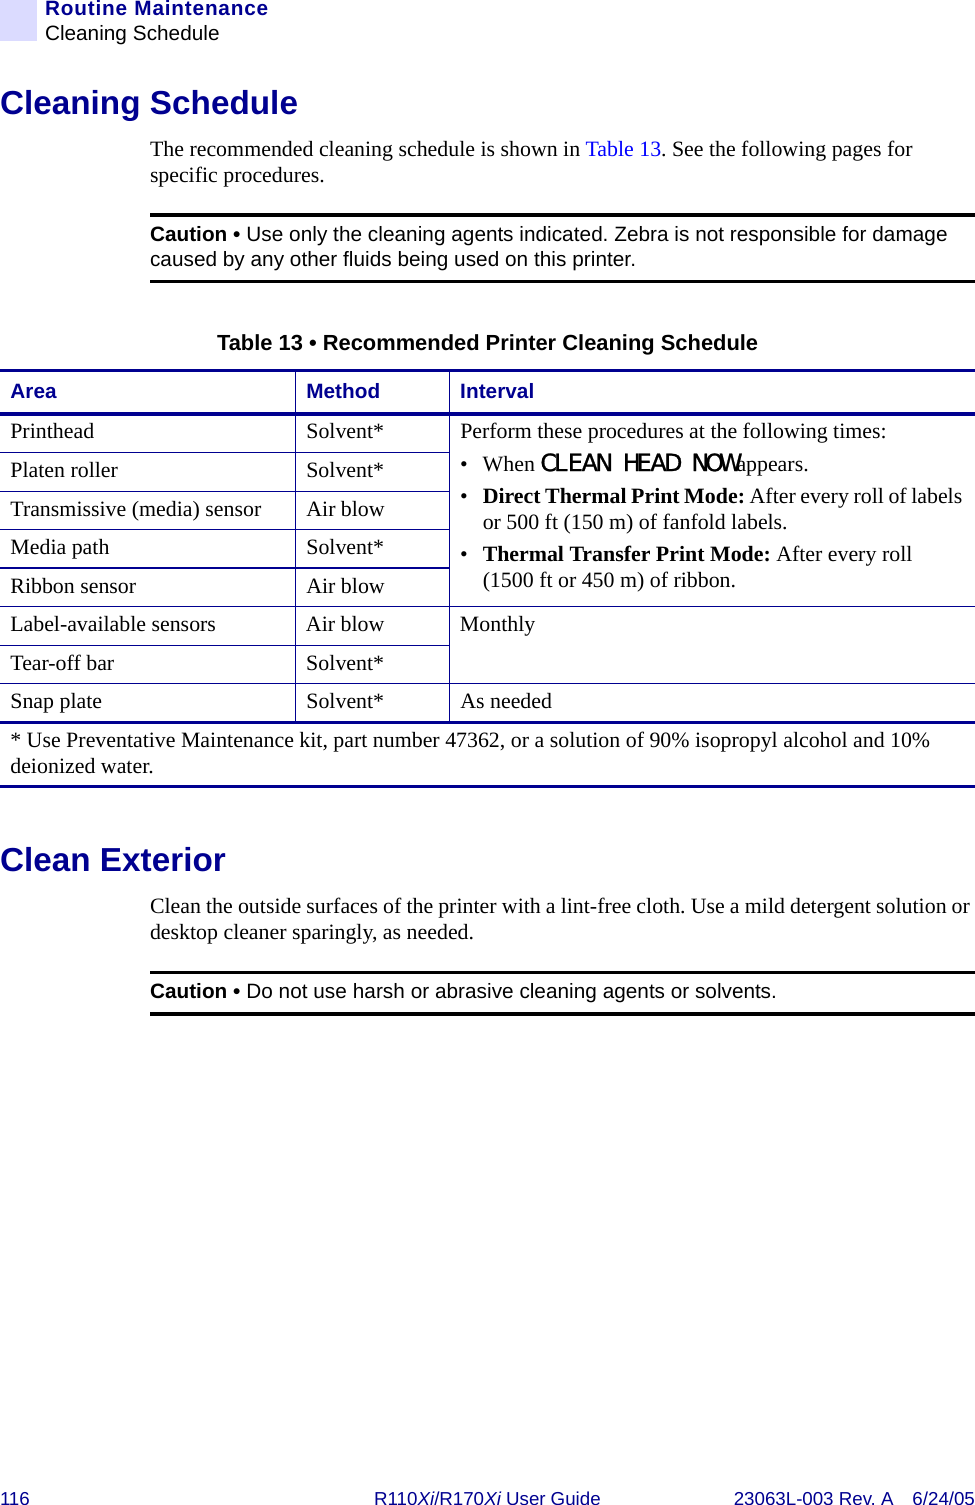 116 R110Xi/R170Xi User Guide 23063L-003 Rev. A 6/24/05Routine MaintenanceCleaning ScheduleCleaning ScheduleThe recommended cleaning schedule is shown in Table 13. See the following pages for specific procedures.Clean ExteriorClean the outside surfaces of the printer with a lint-free cloth. Use a mild detergent solution or desktop cleaner sparingly, as needed.Caution • Use only the cleaning agents indicated. Zebra is not responsible for damage caused by any other fluids being used on this printer.Table 13 • Recommended Printer Cleaning ScheduleArea Method IntervalPrinthead Solvent* Perform these procedures at the following times:•When CLEAN HEAD NOWappears.•Direct Thermal Print Mode: After every roll of labels or 500 ft (150 m) of fanfold labels.•Thermal Transfer Print Mode: After every roll (1500 ft or 450 m) of ribbon.Platen roller Solvent*Transmissive (media) sensor Air blowMedia path Solvent*Ribbon sensor Air blowLabel-available sensors Air blow MonthlyTear-off bar Solvent*Snap plate Solvent* As needed* Use Preventative Maintenance kit, part number 47362, or a solution of 90% isopropyl alcohol and 10% deionized water. Caution • Do not use harsh or abrasive cleaning agents or solvents.